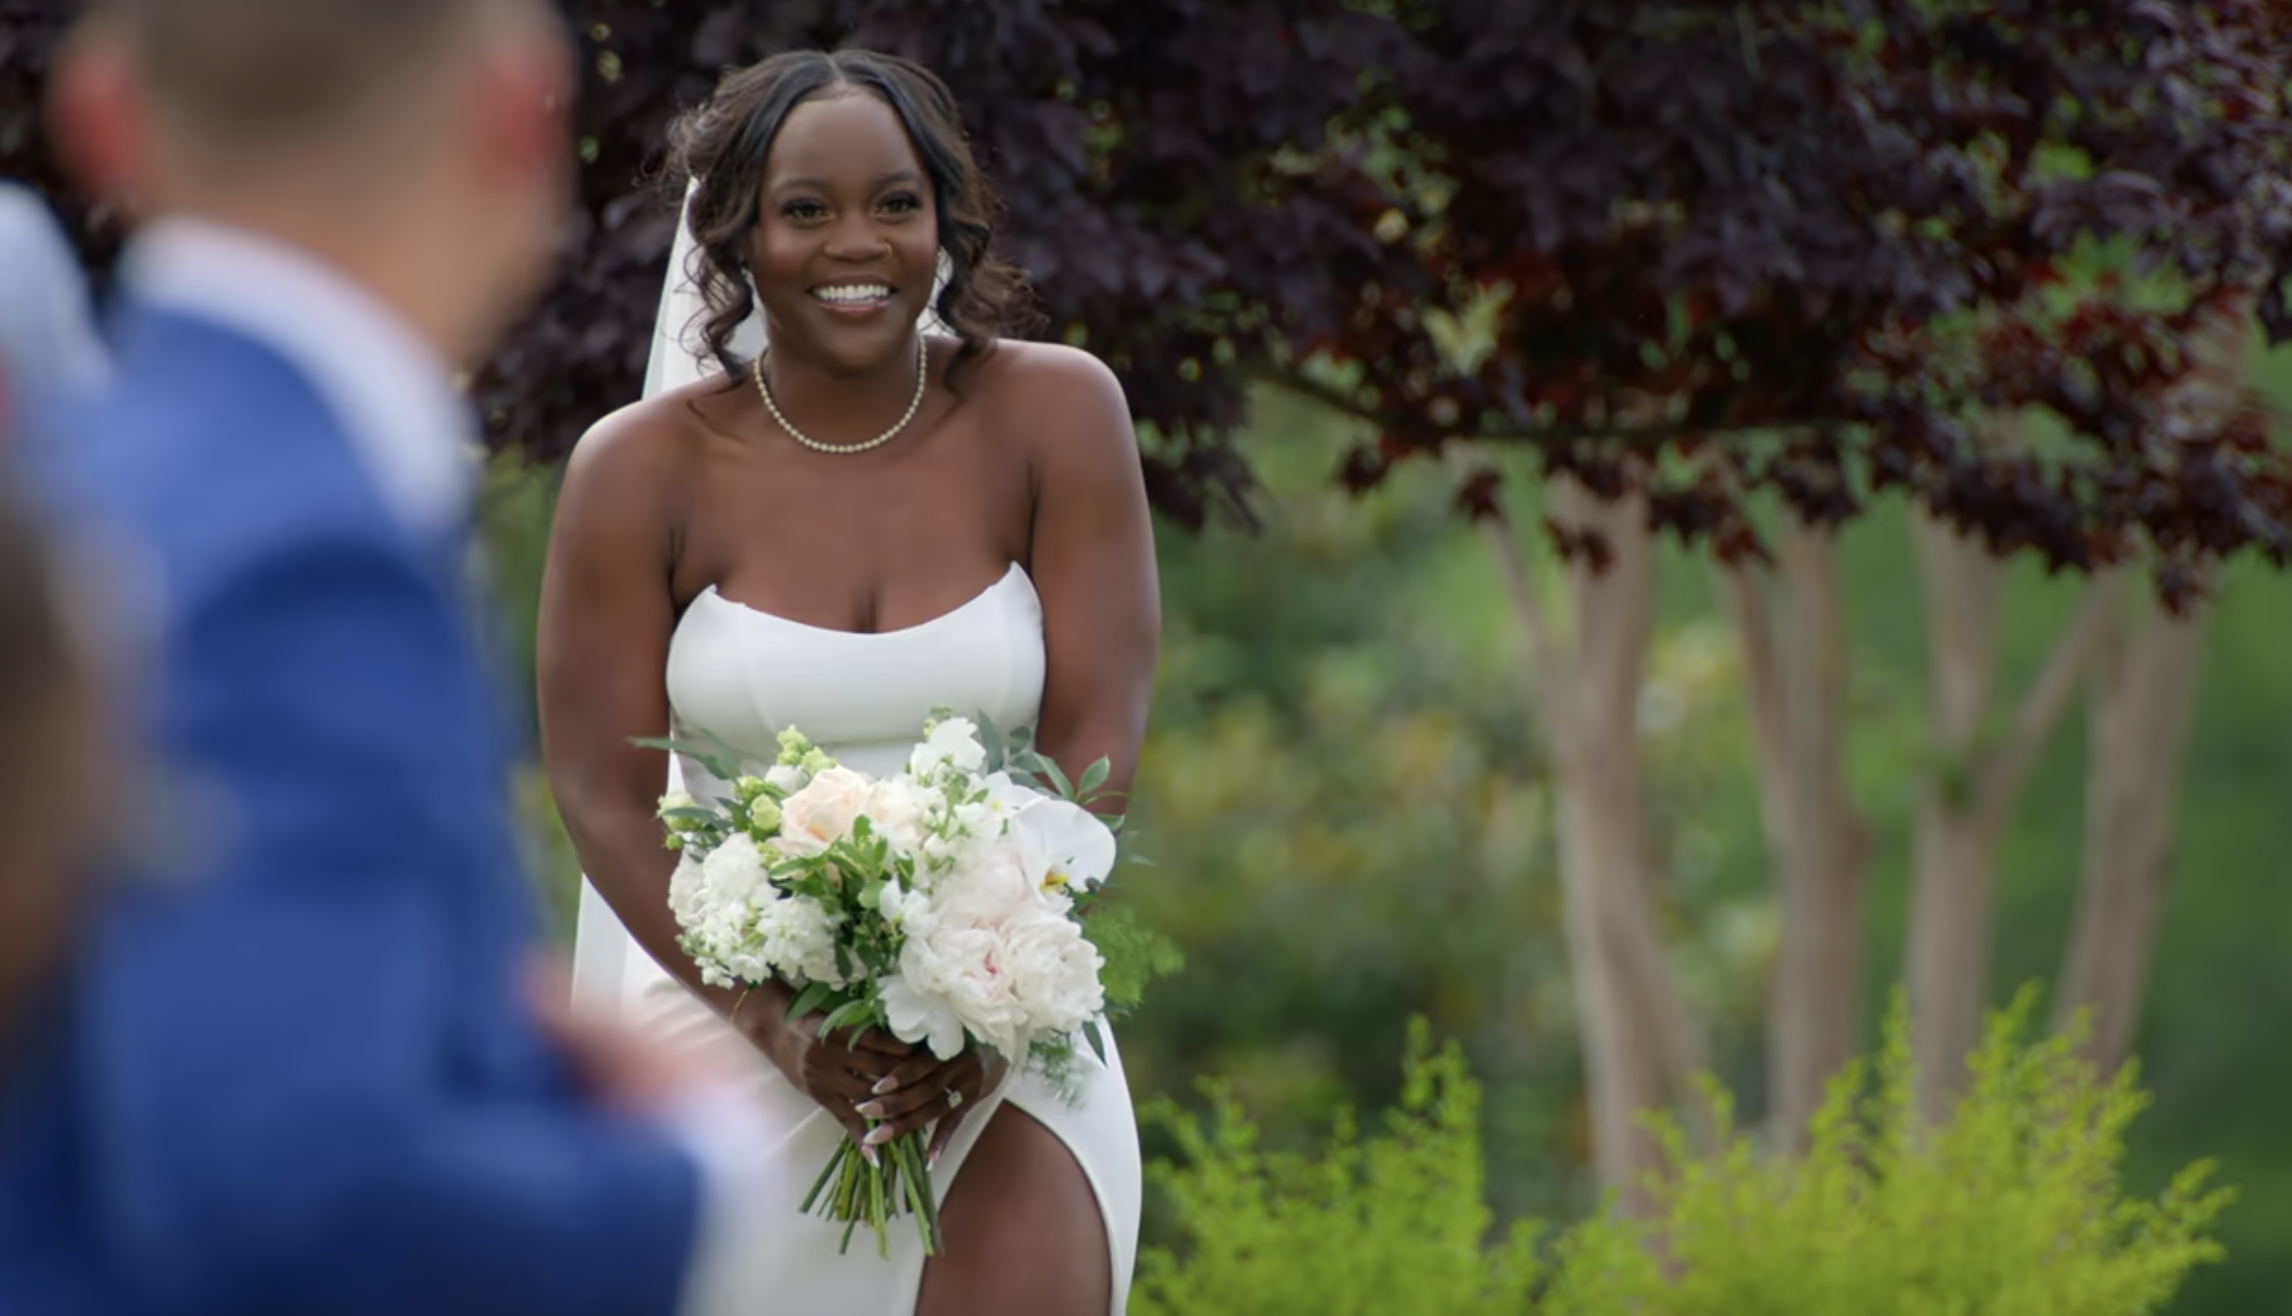 AD walking down the aisle at her wedding